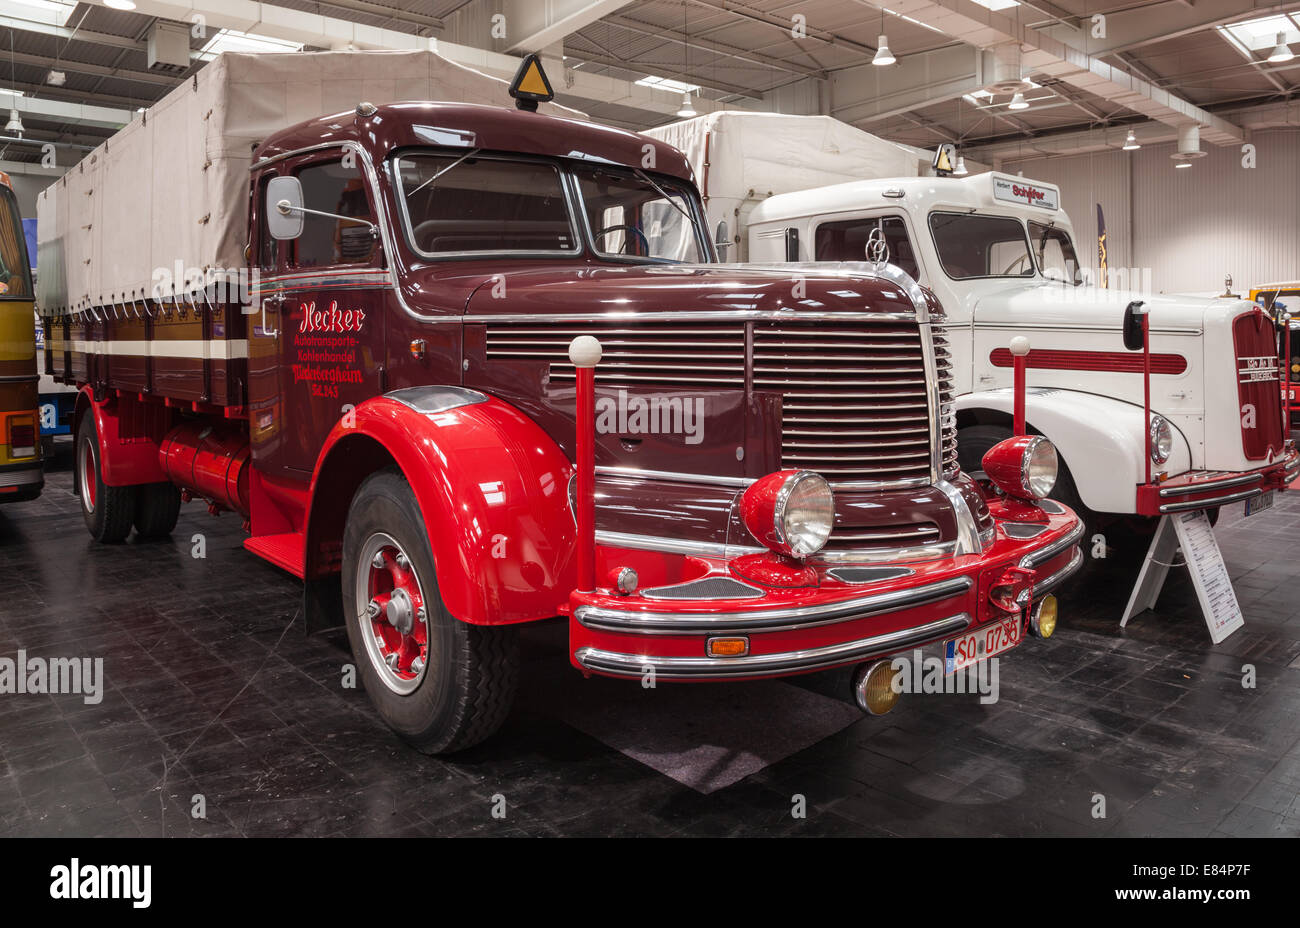 Historic KRUPP TITAN SWL 80 truck from 1952 at the 65th IAA Commercial Vehicles Fair 2014 in Hannover, Germany Stock Photo